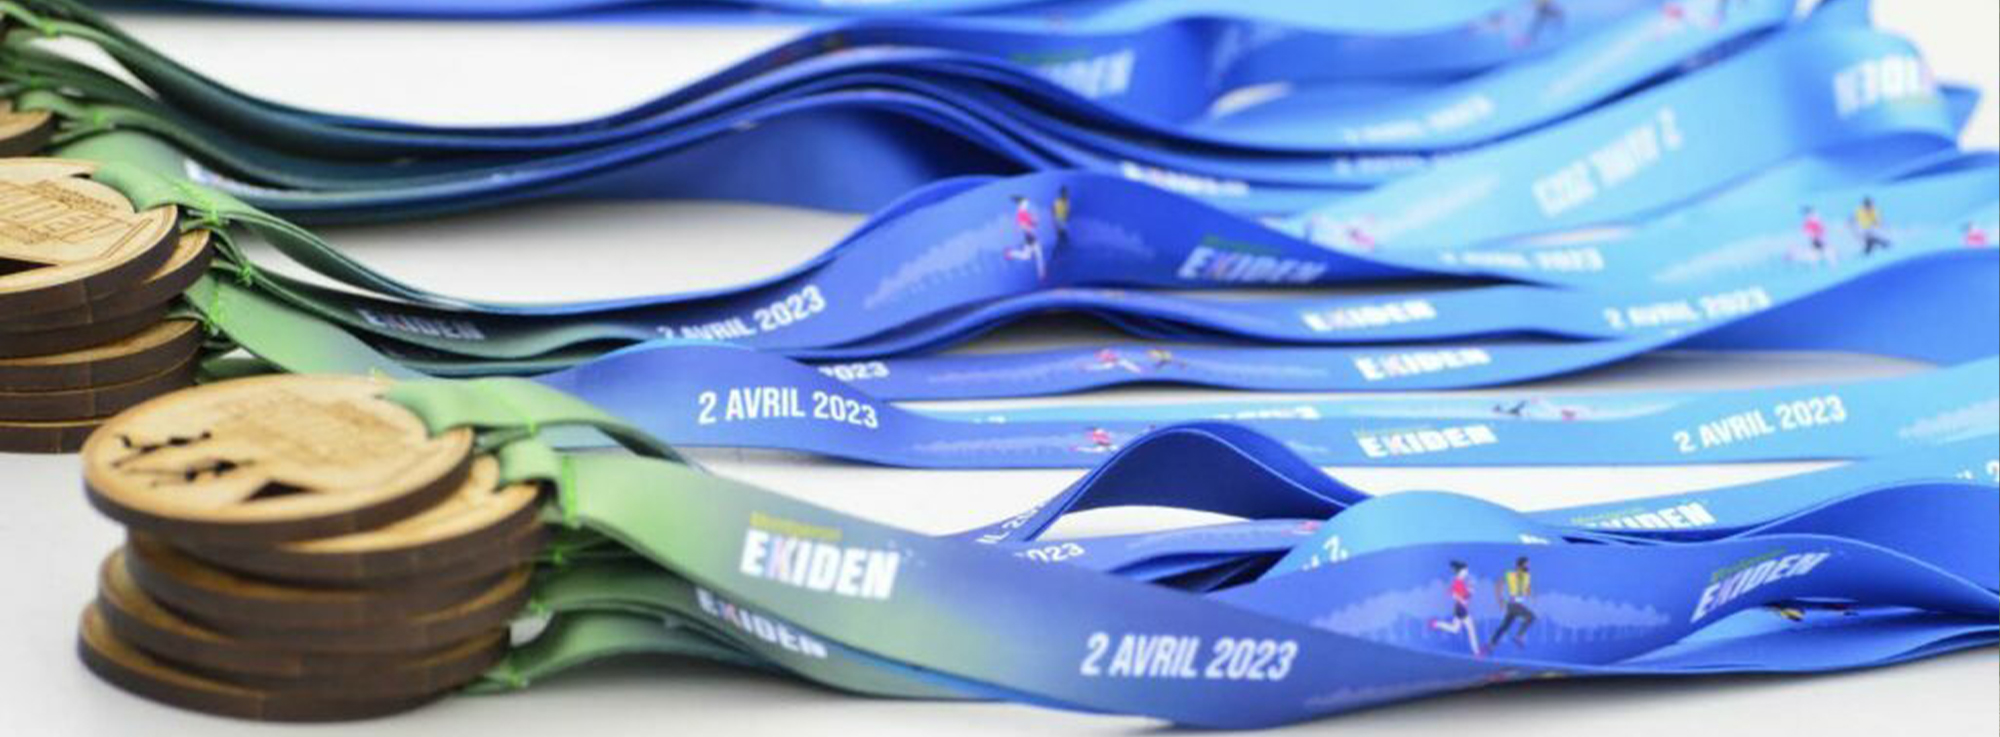 You are currently viewing EKIDEN 2023 – Les résultats